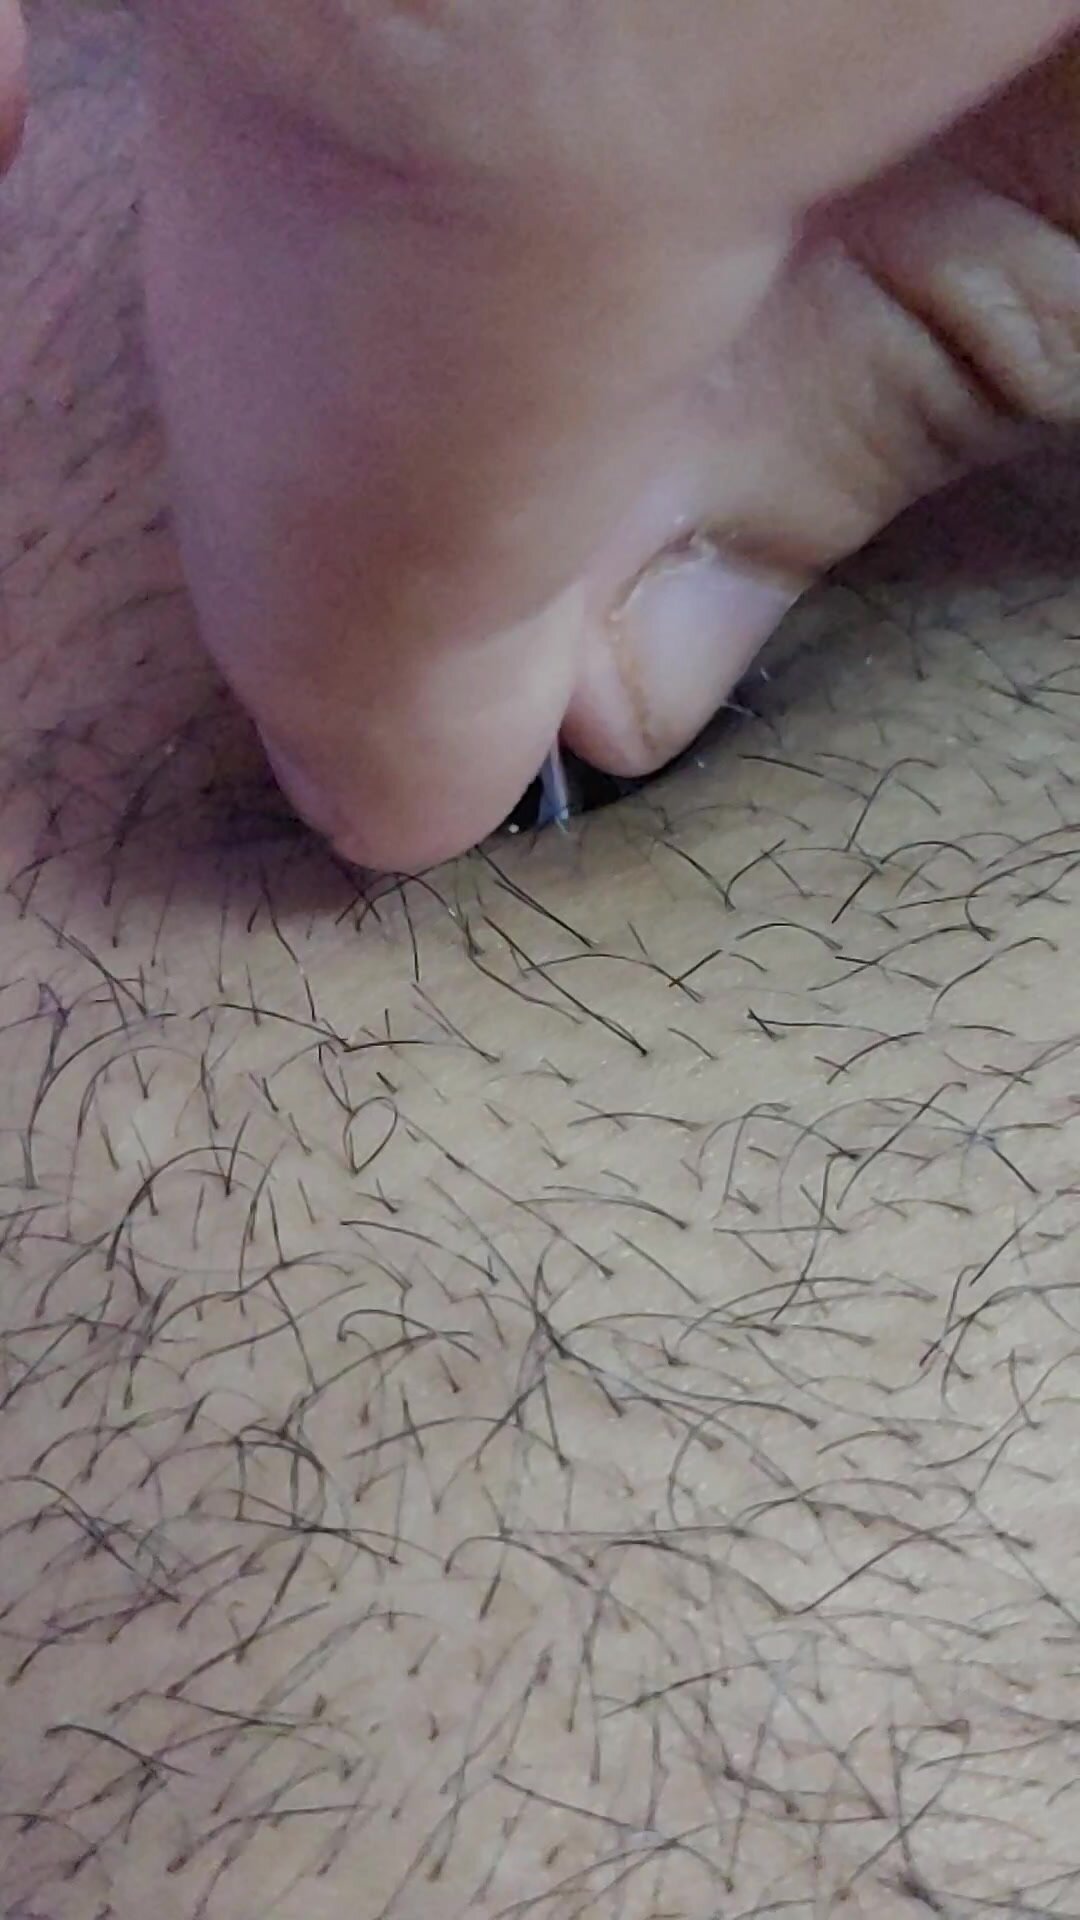 Removing wire from navel